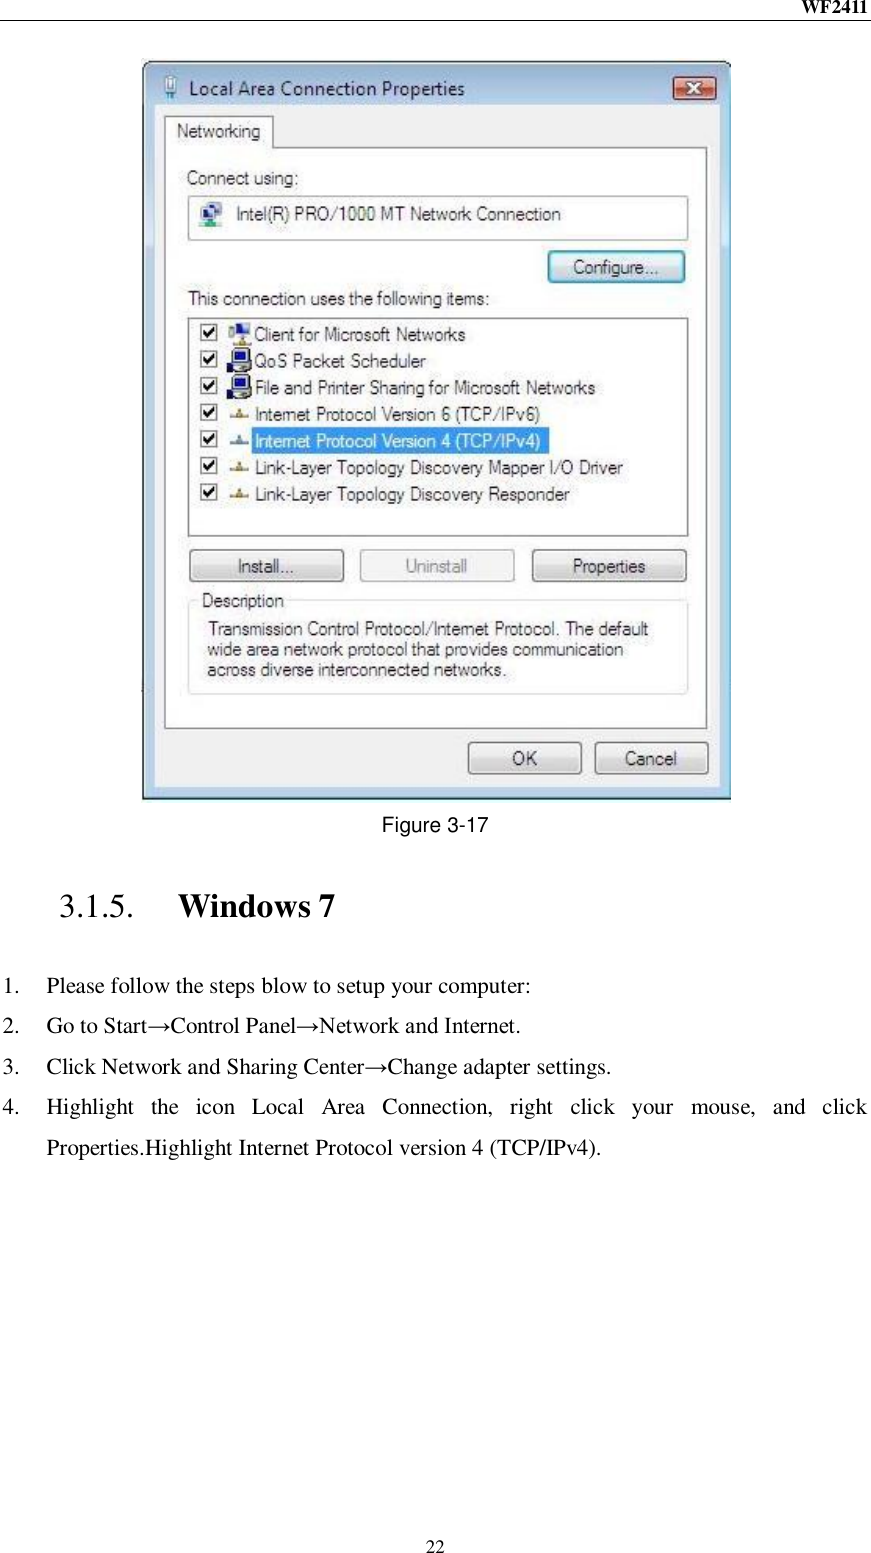 WF2411  22  Figure 3-17 3.1.5. Windows 7 1. Please follow the steps blow to setup your computer: 2. Go to Start→Control Panel→Network and Internet. 3. Click Network and Sharing Center→Change adapter settings. 4. Highlight  the  icon  Local  Area  Connection,  right  click  your  mouse,  and  click Properties.Highlight Internet Protocol version 4 (TCP/IPv4). 